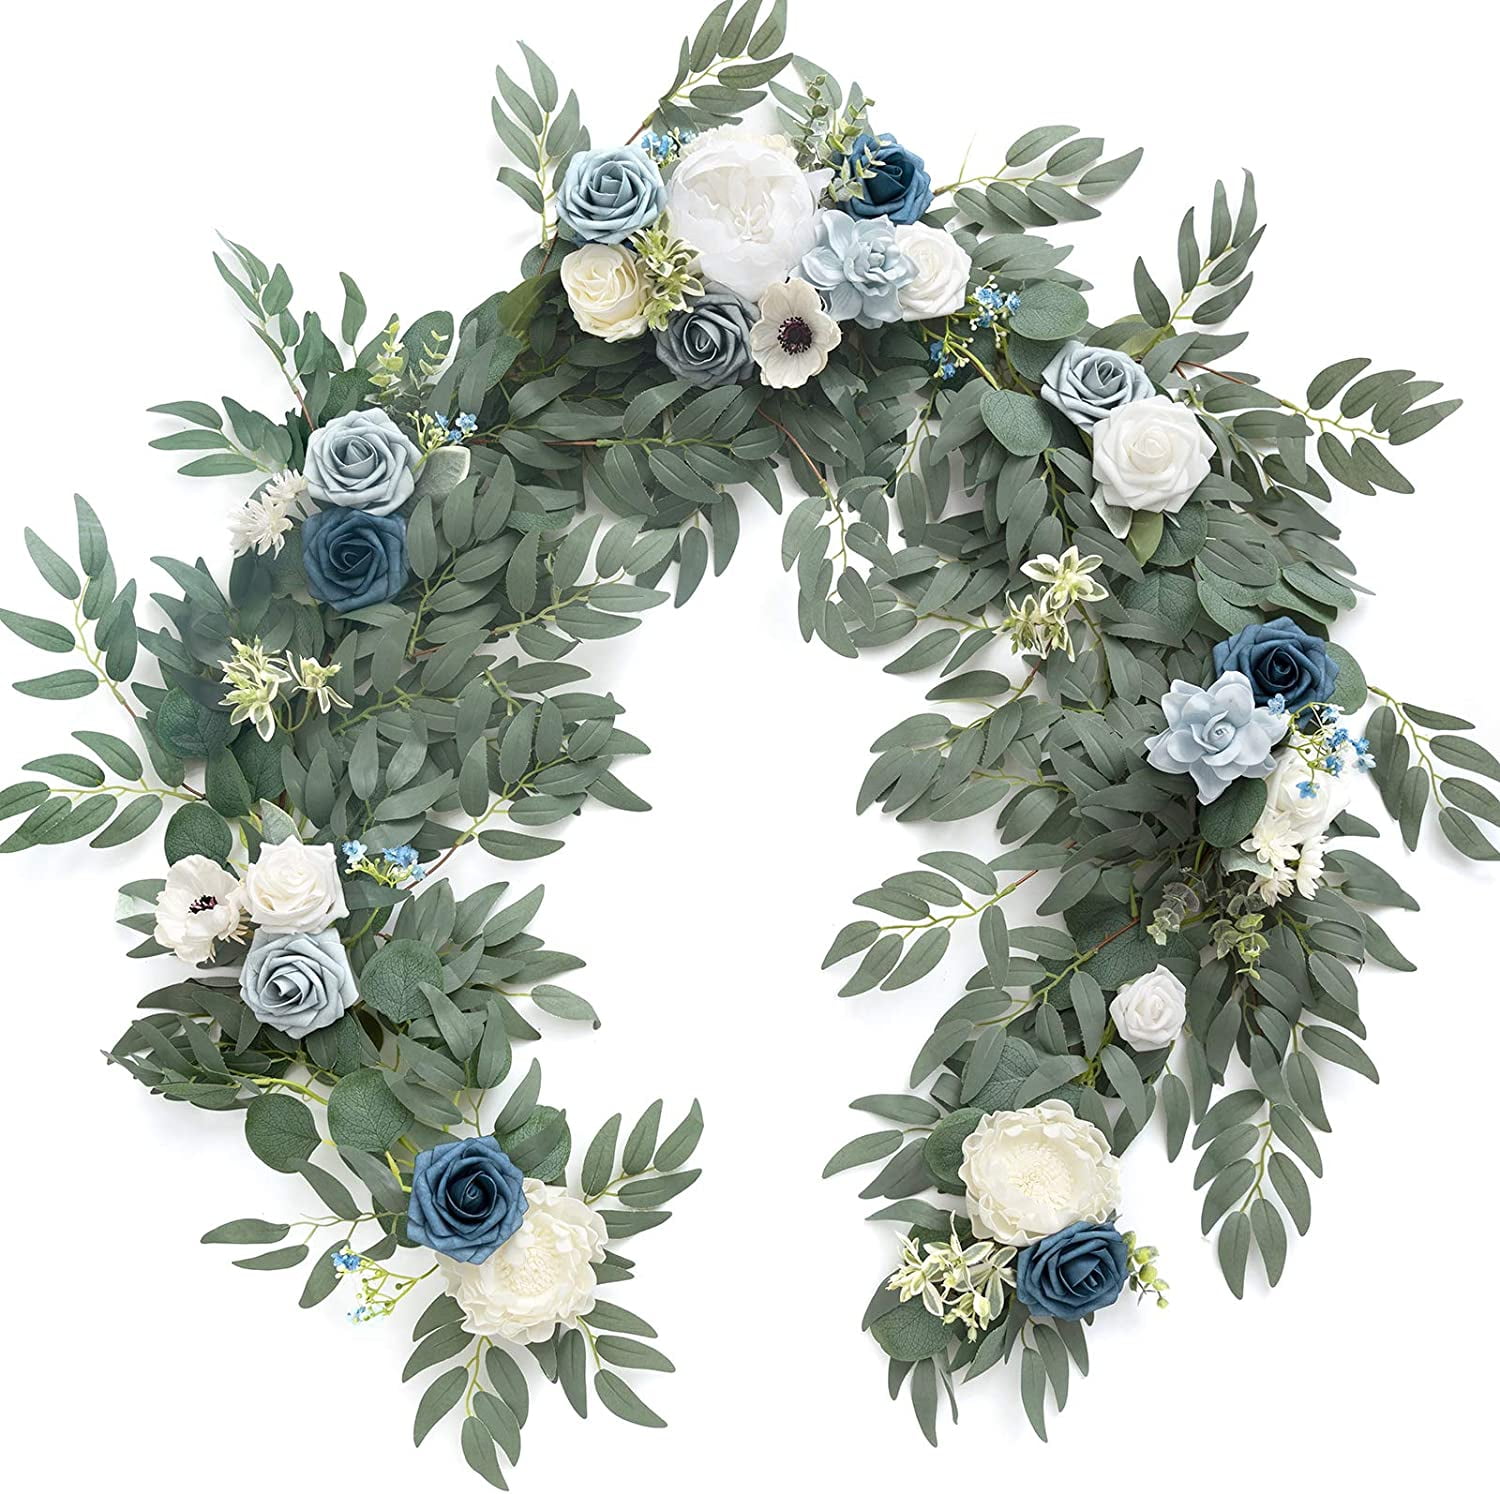 Wedding Table Garland with Flowers Handcrafted Wedding Centerpieces for Rehearsal Dinner Bridal Shower Ling's moment Artificial Eucalyptus Garland with Flowers 6FT Dusty Rose